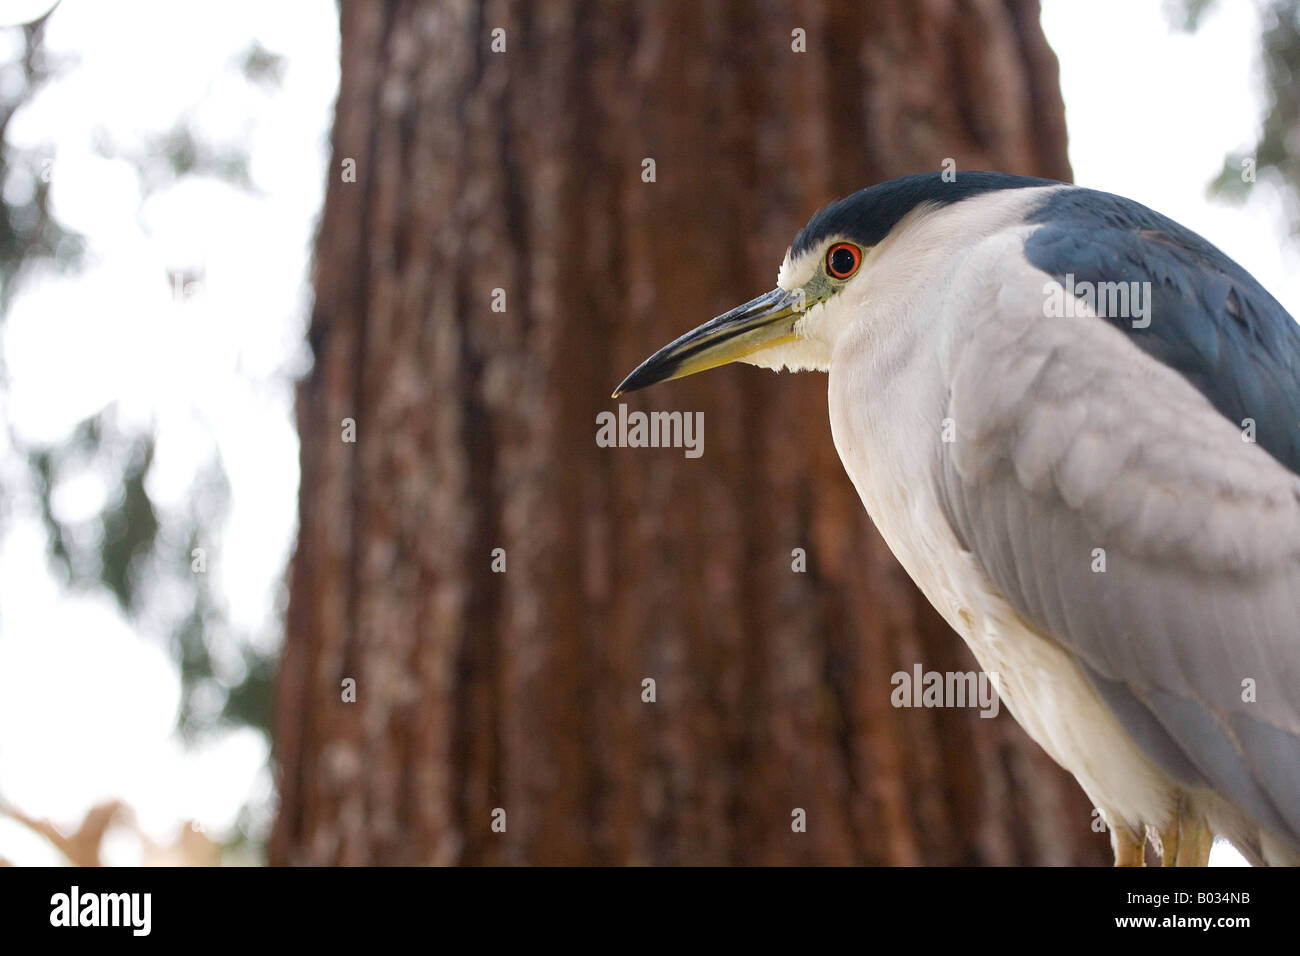 The Black-crowned Night Heron (Nycticorax nycticorax) Stock Photo